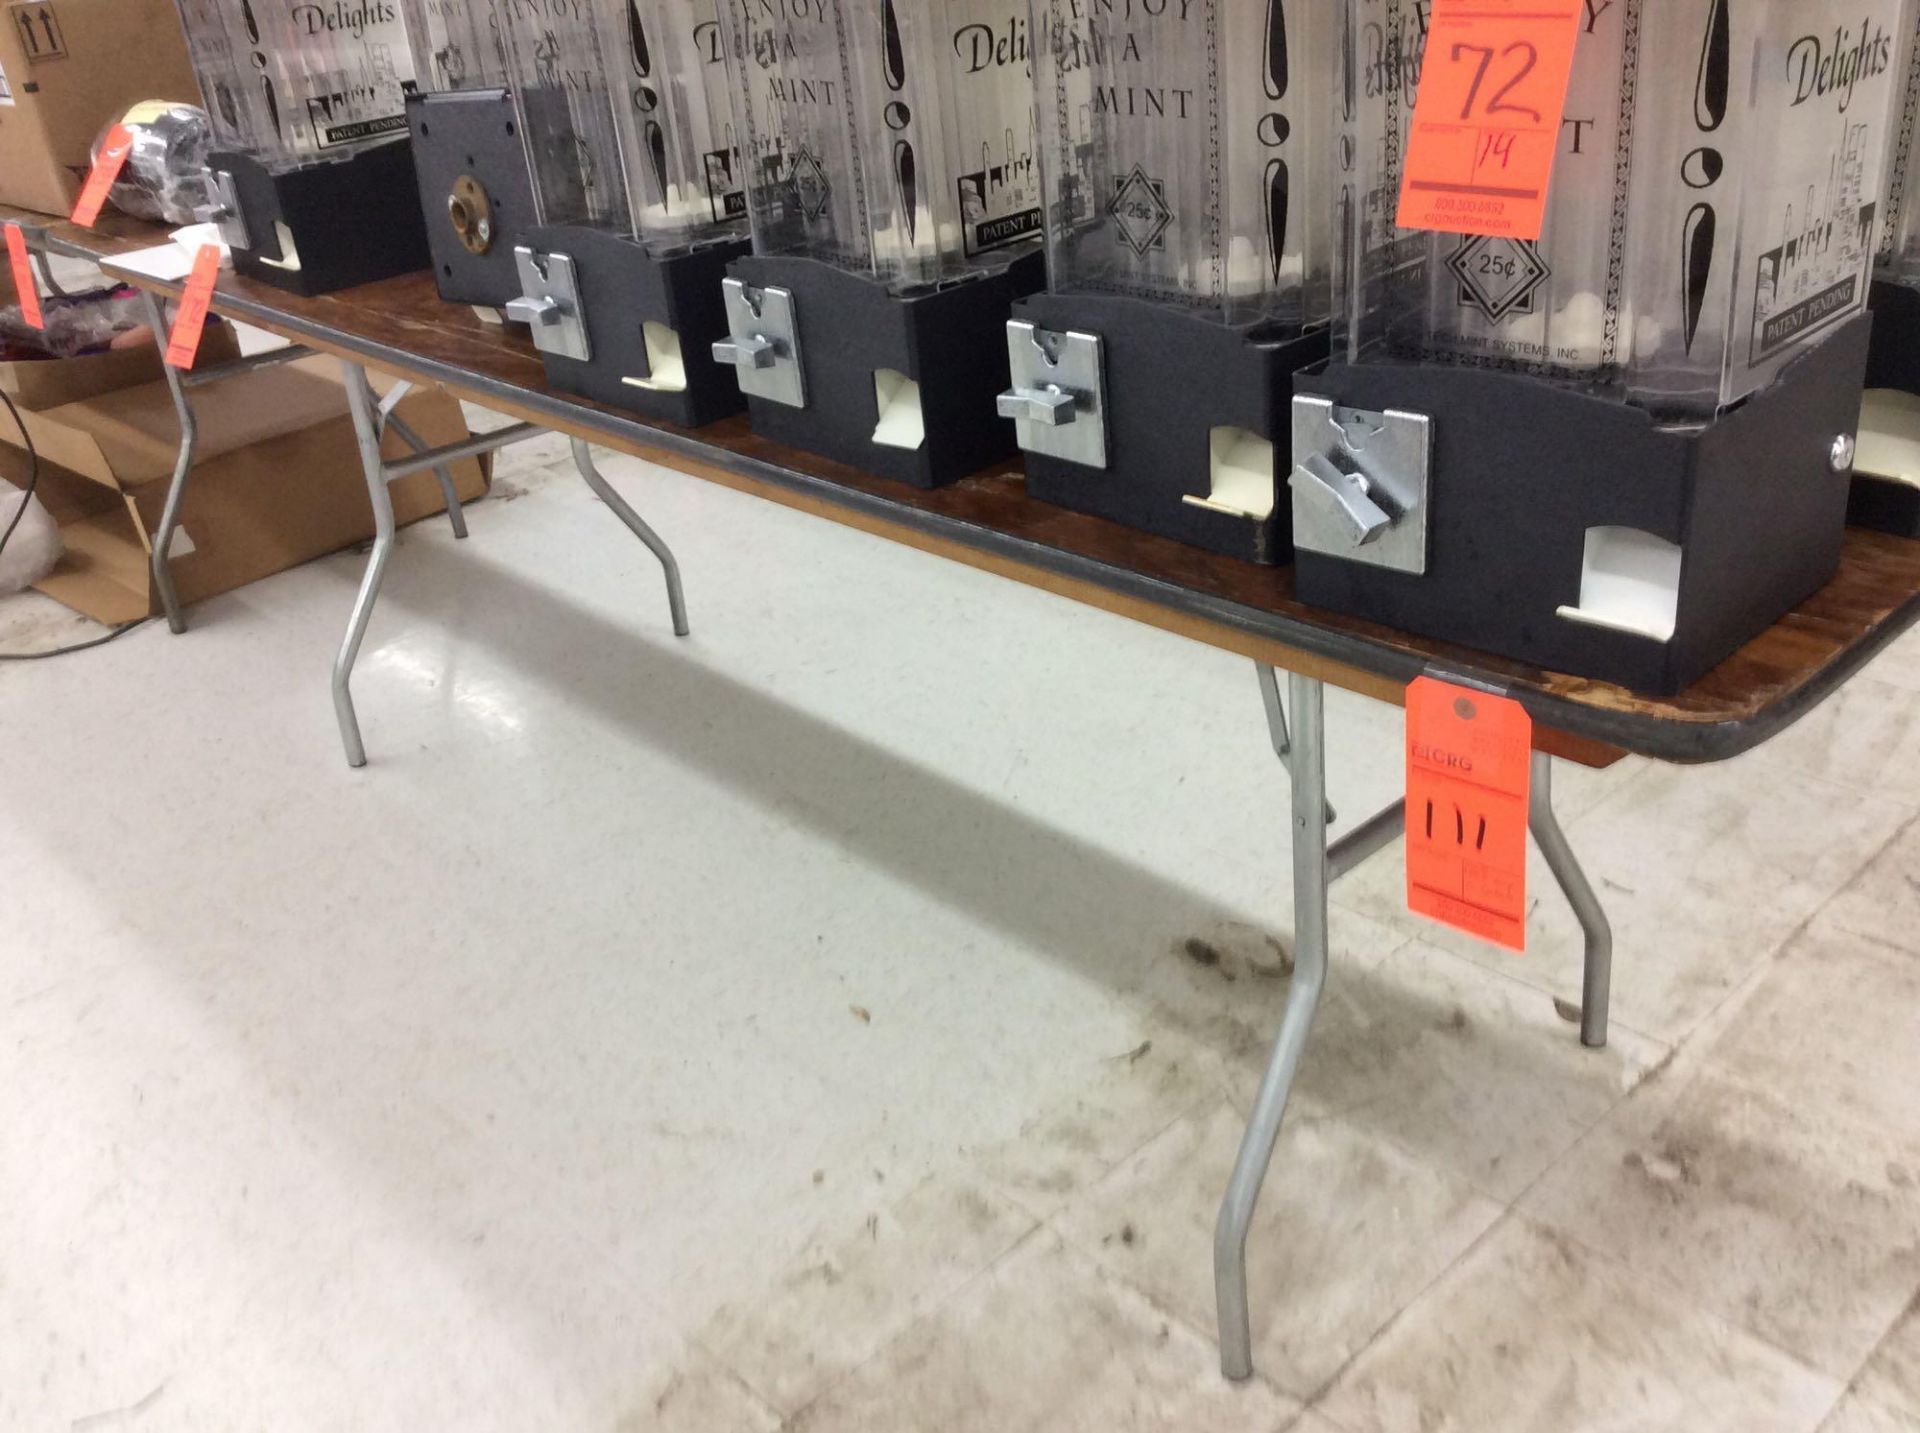 Lot of (15) assorted 8 foot by 30 inch folding leg wood tables, no contents. Purchaser should - Image 2 of 3